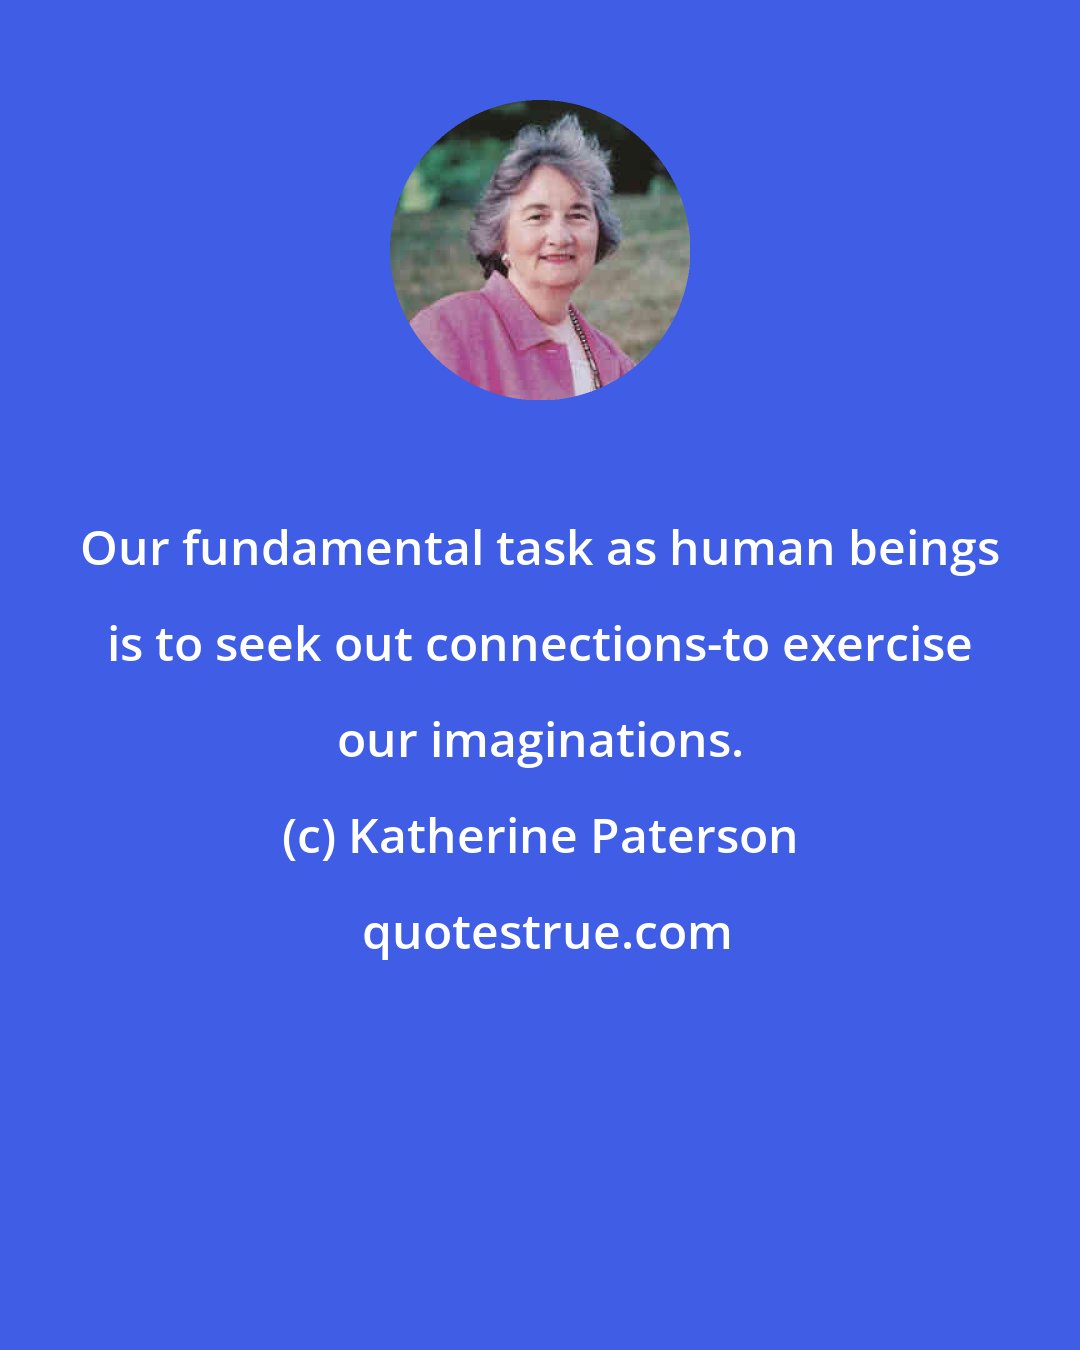 Katherine Paterson: Our fundamental task as human beings is to seek out connections-to exercise our imaginations.